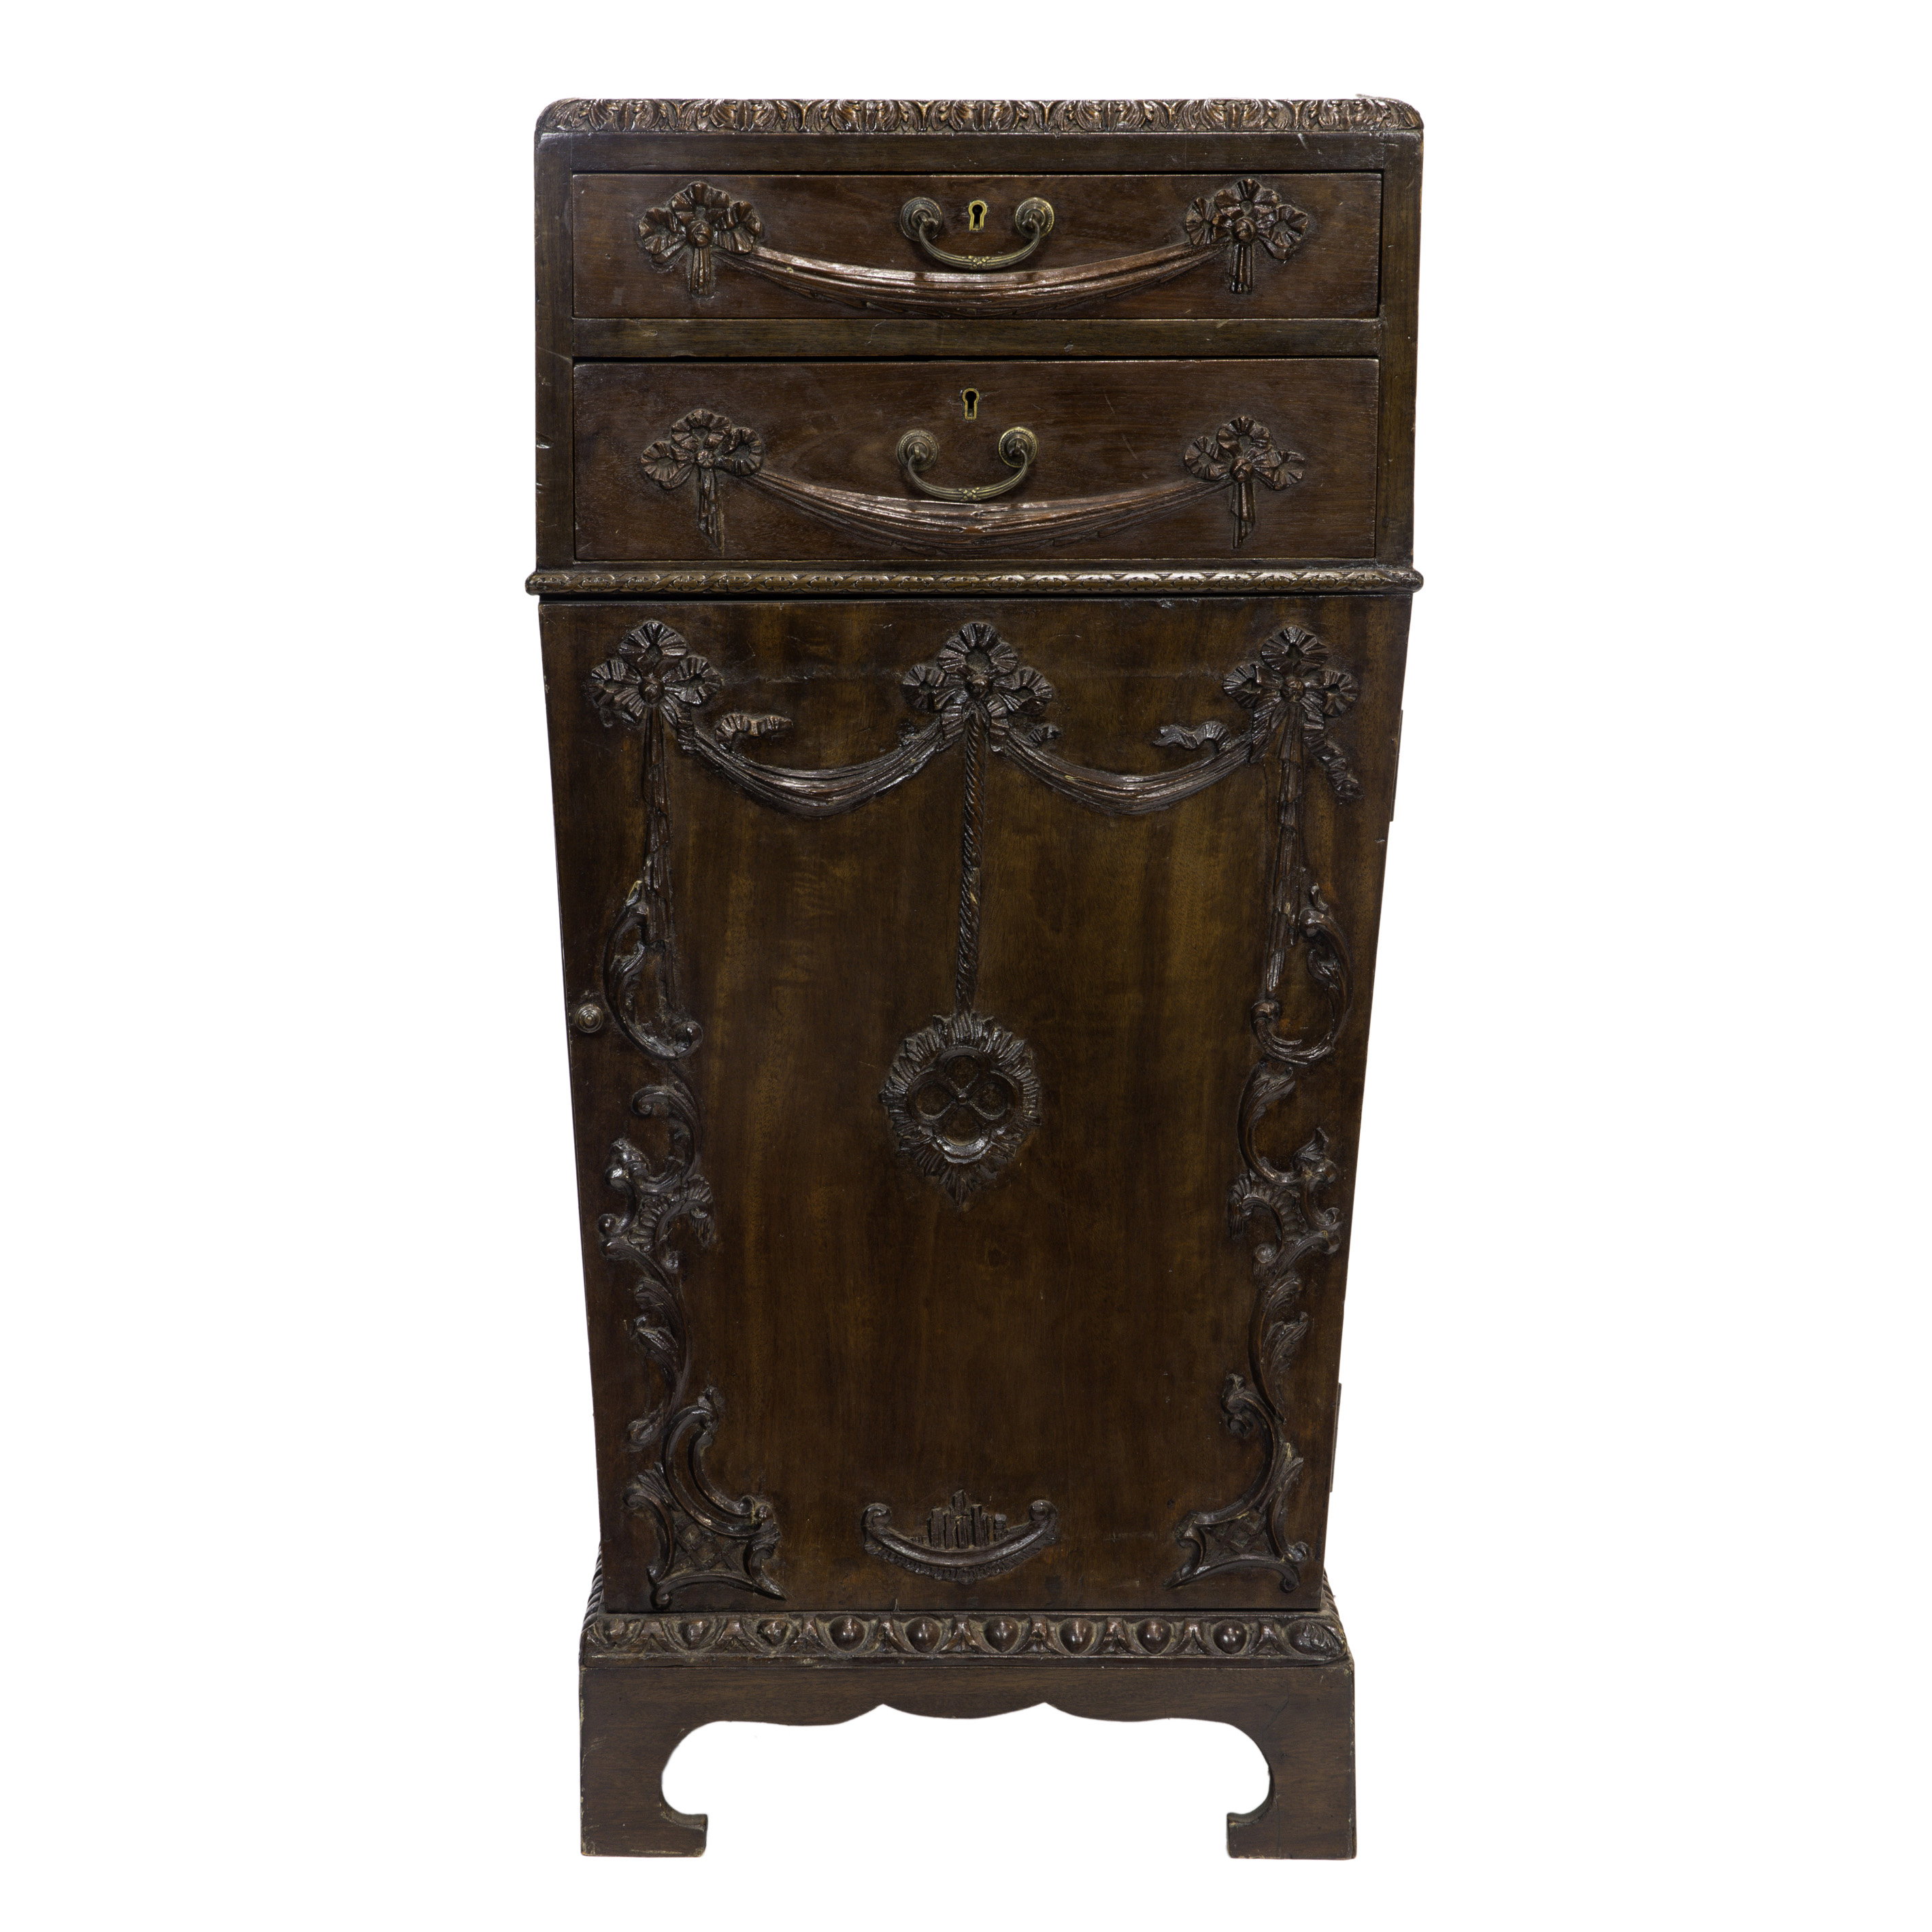 A FRENCH MARBLE TOP PARLOR CABINET 3a45af